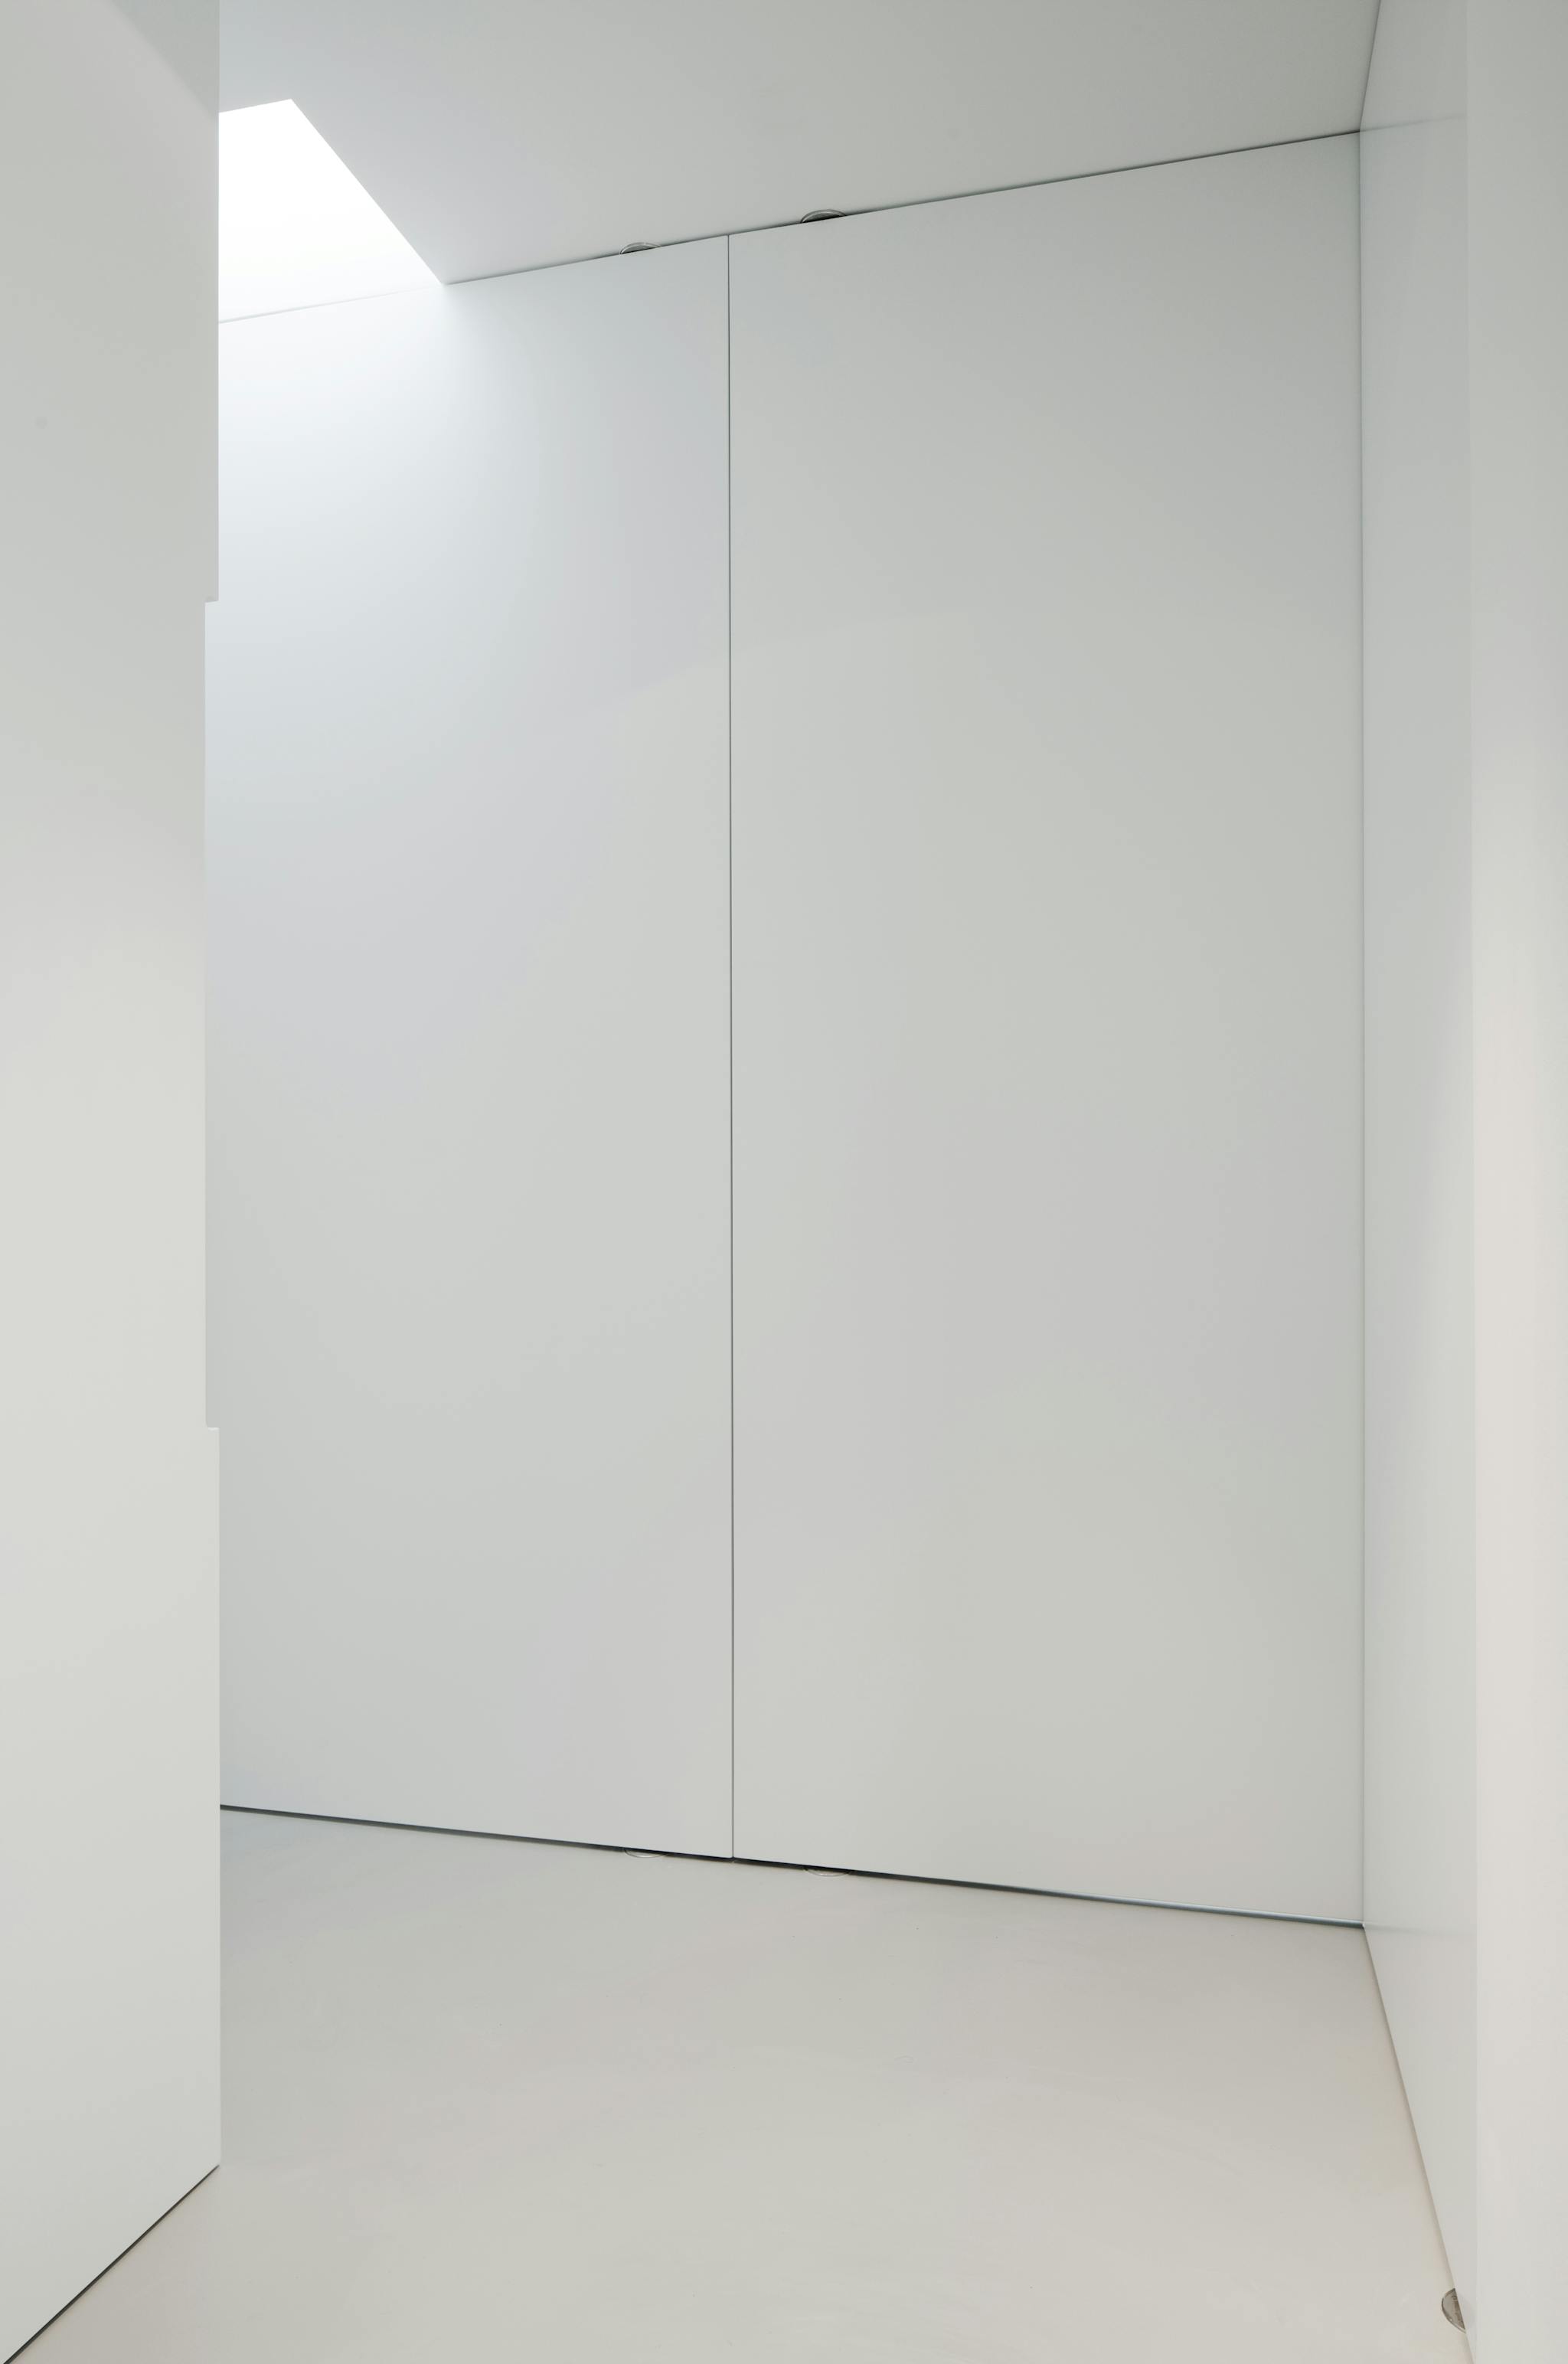 A white minimal space with two closed flush pivoting doors.